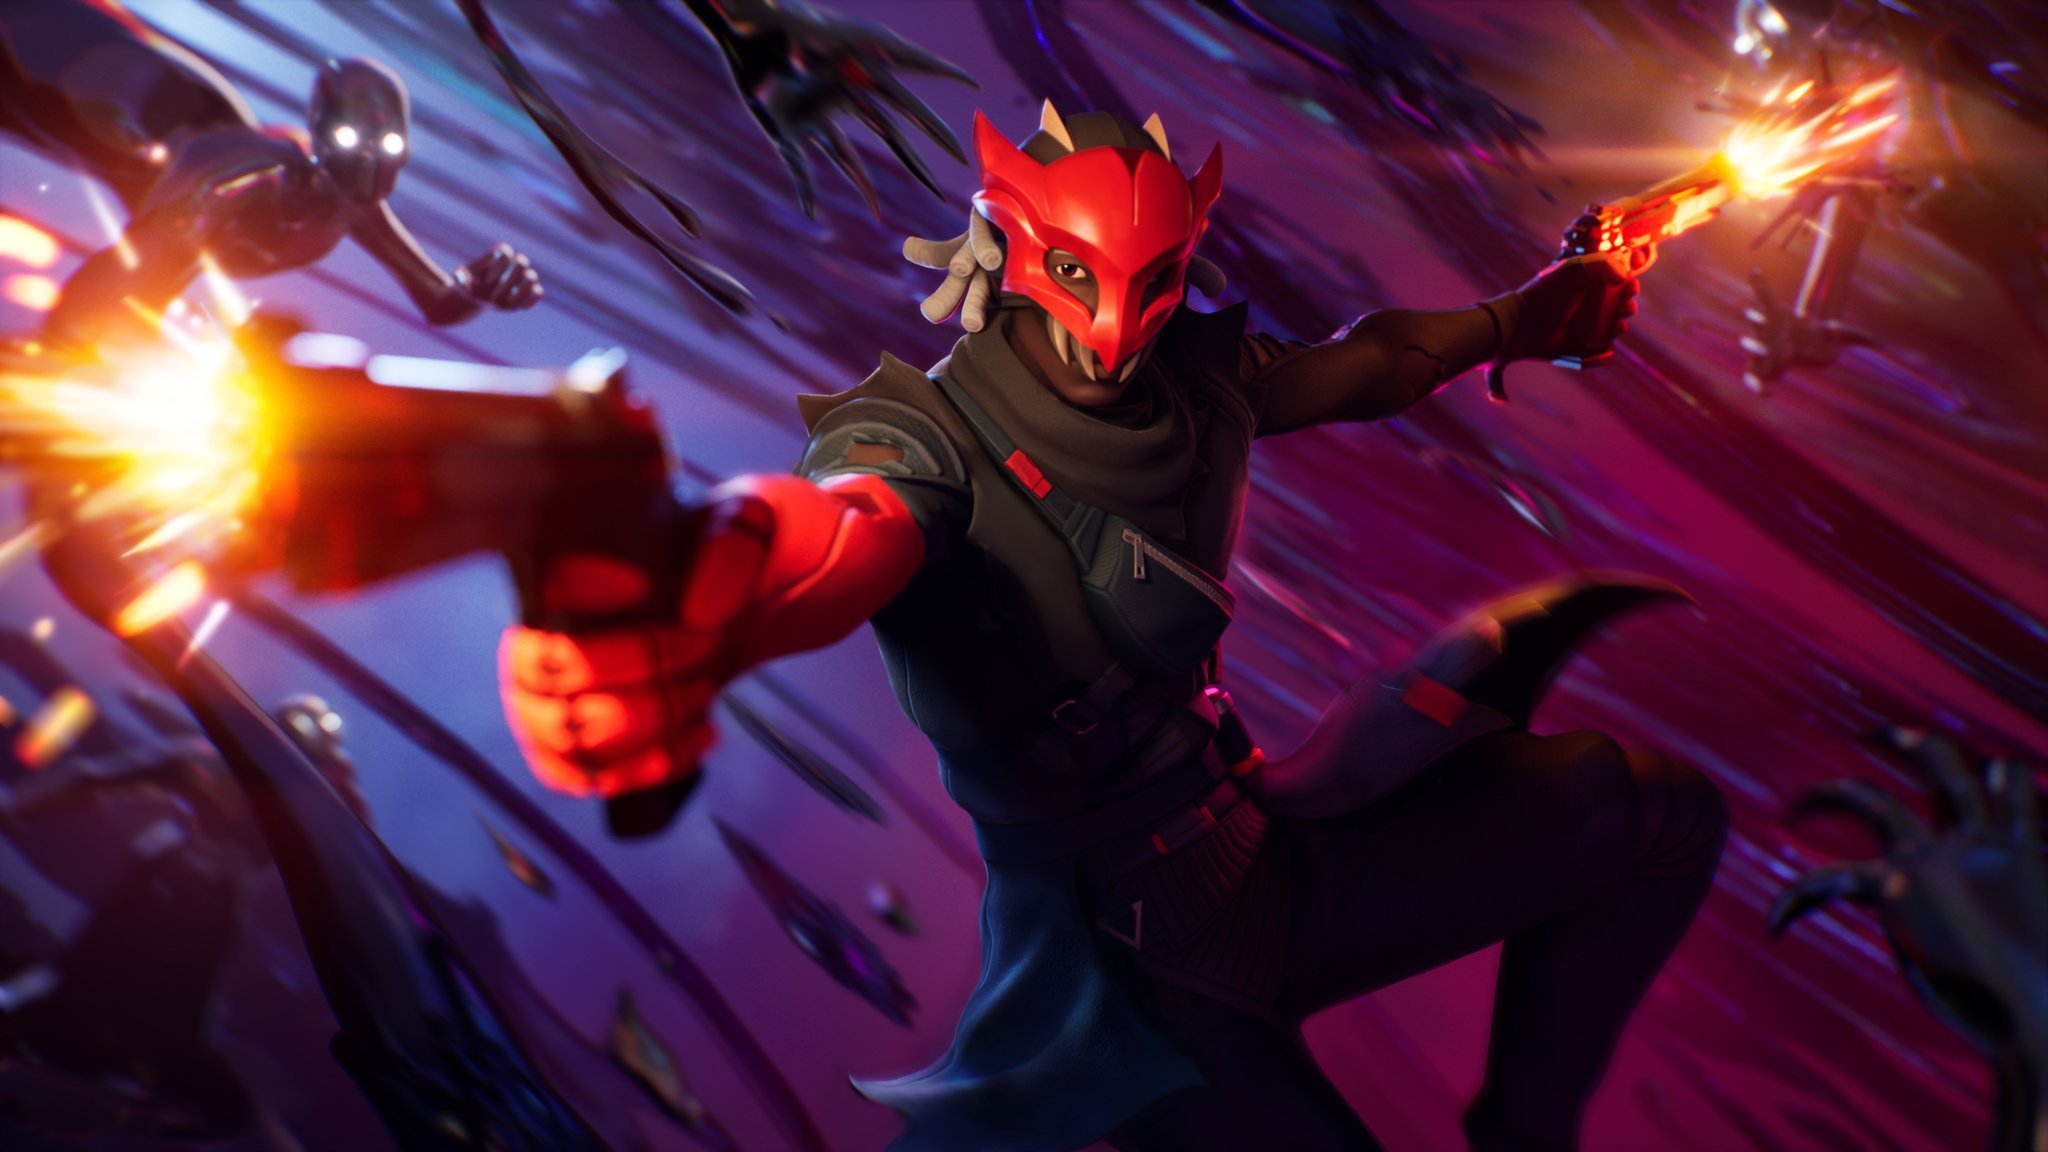 A loading screen from Fortnite showing a man in a red mask with dual pistols